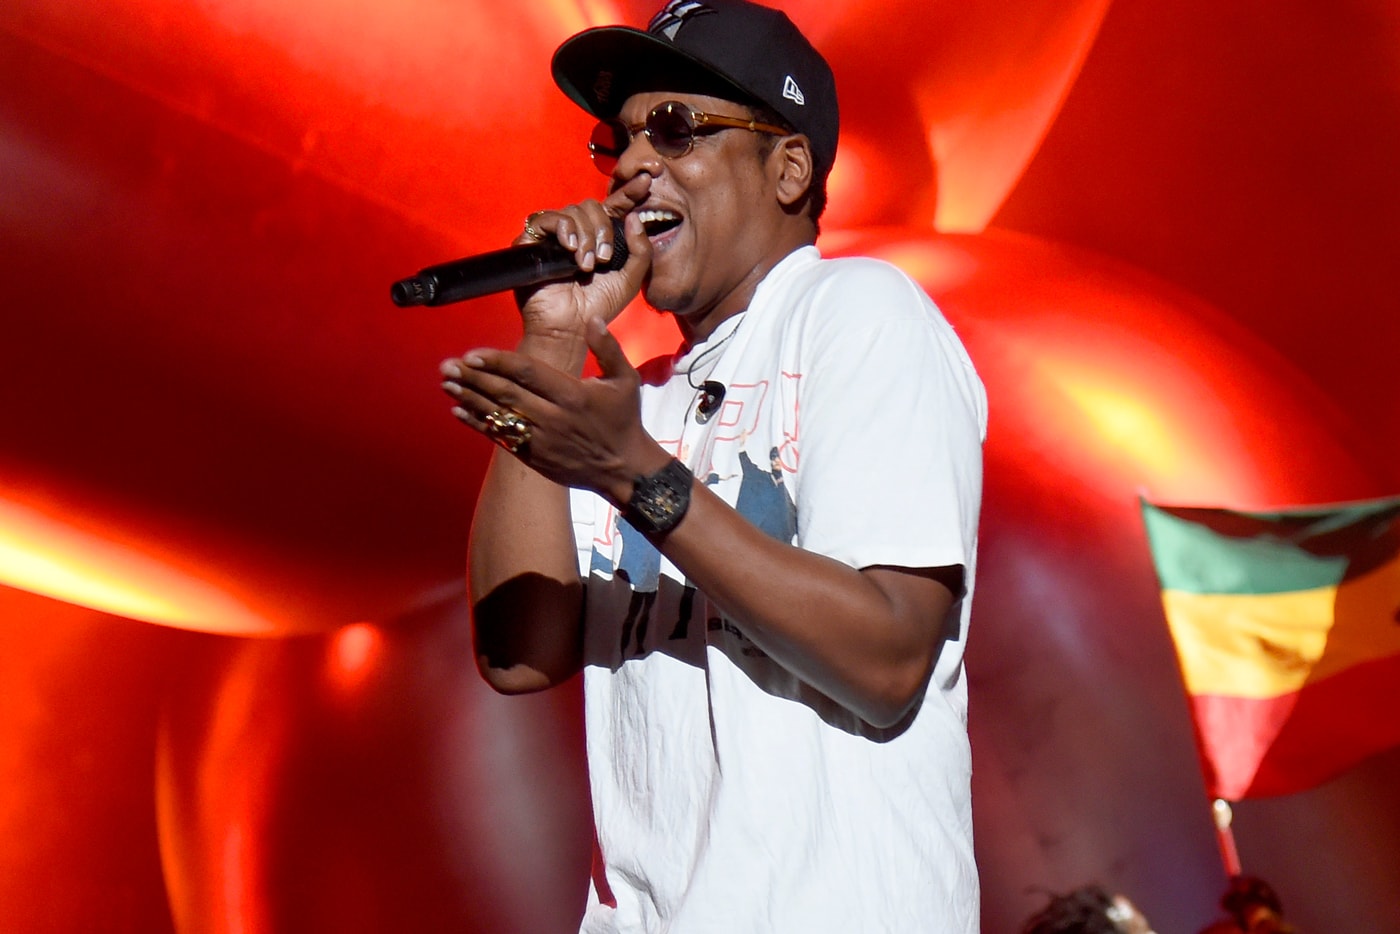 Jay Z Curates a Rap Songwriting Hall of Fame Playlist Music Artist Hip-hop HOVA 2Pac Biggie Eminem OutKast